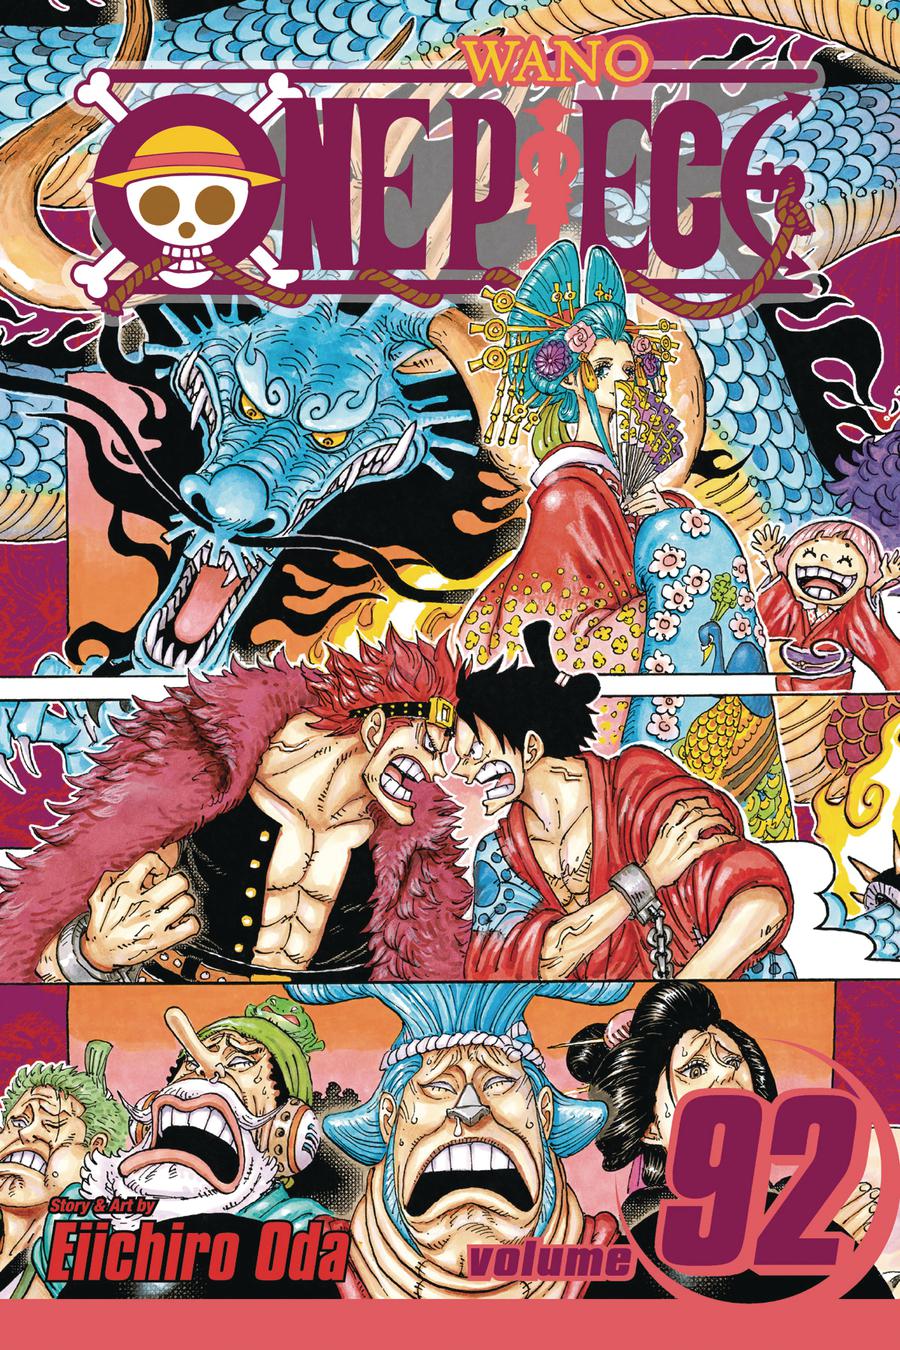 One Piece Vol 92 Wano GN